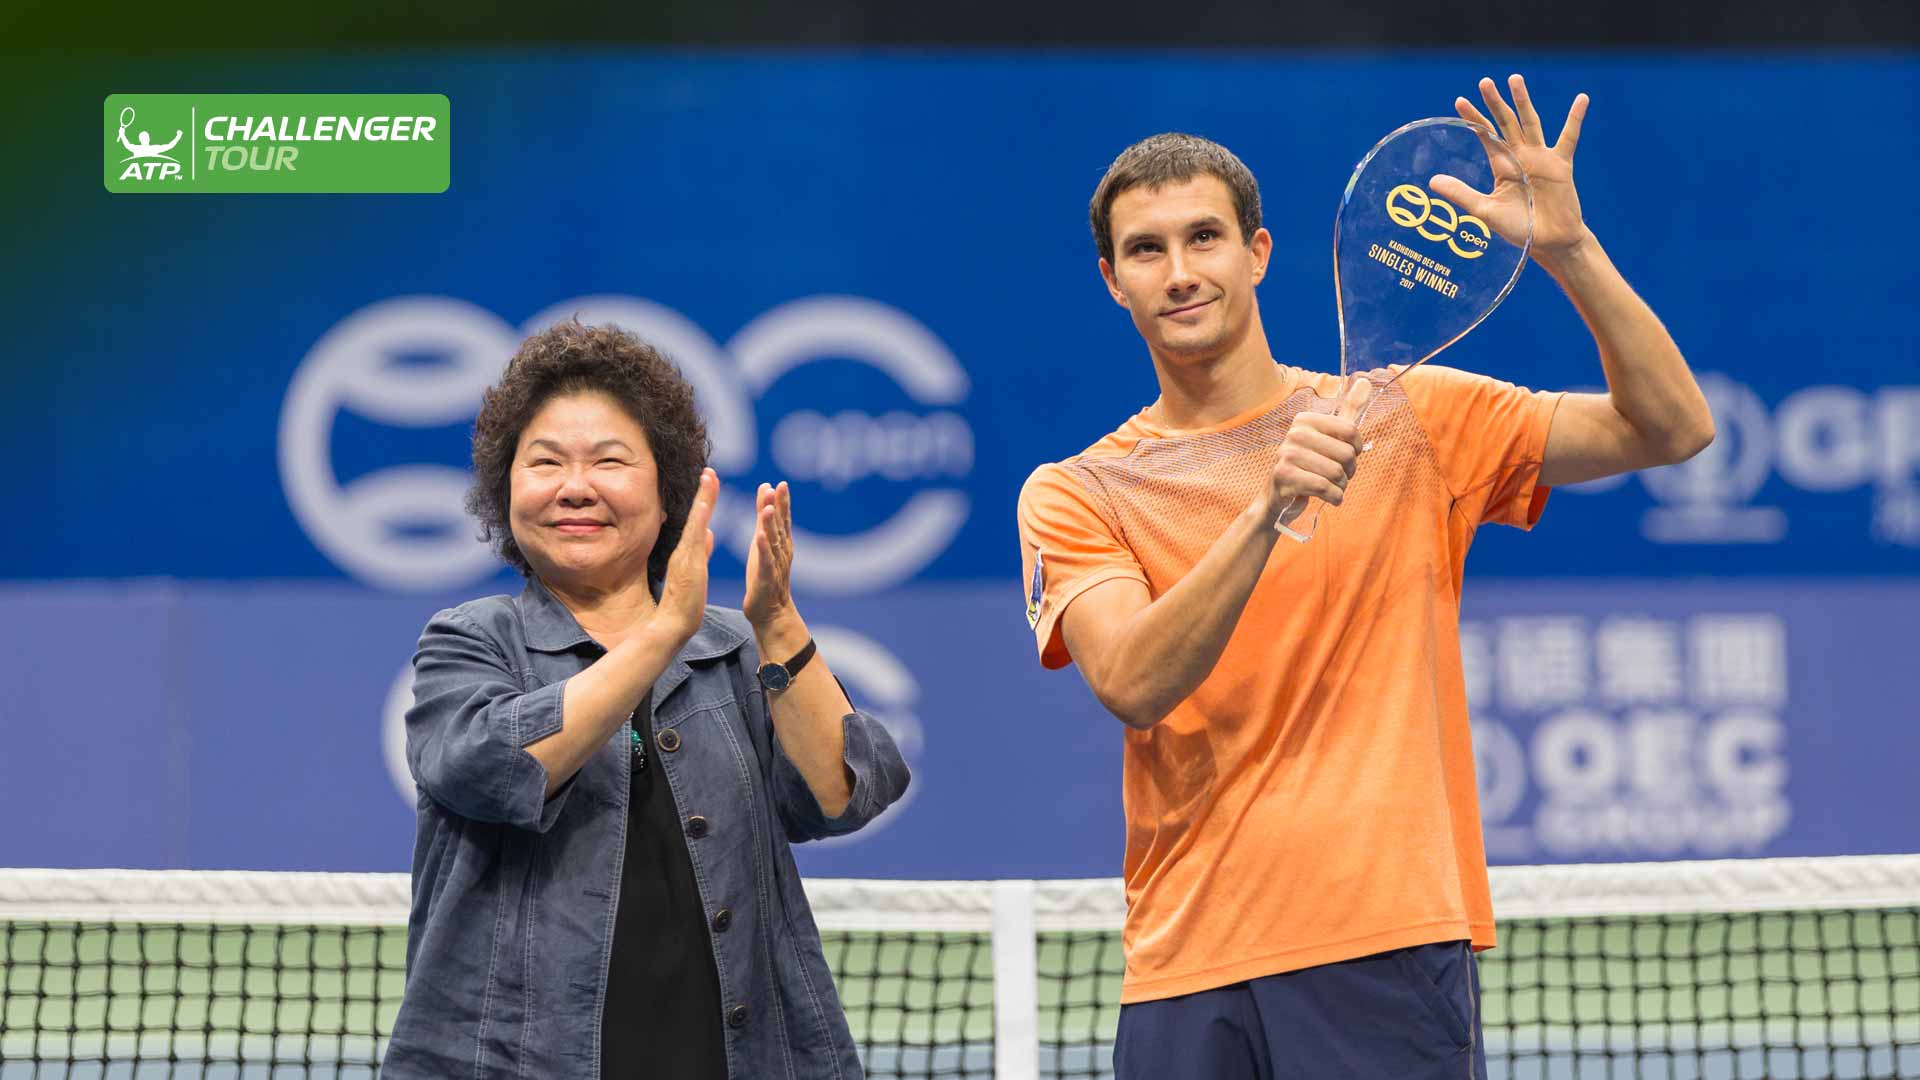 Evgeny Donskoy Closes In On Personal Best Ranking Following Kaohsiung Win ATP Tour Tennis